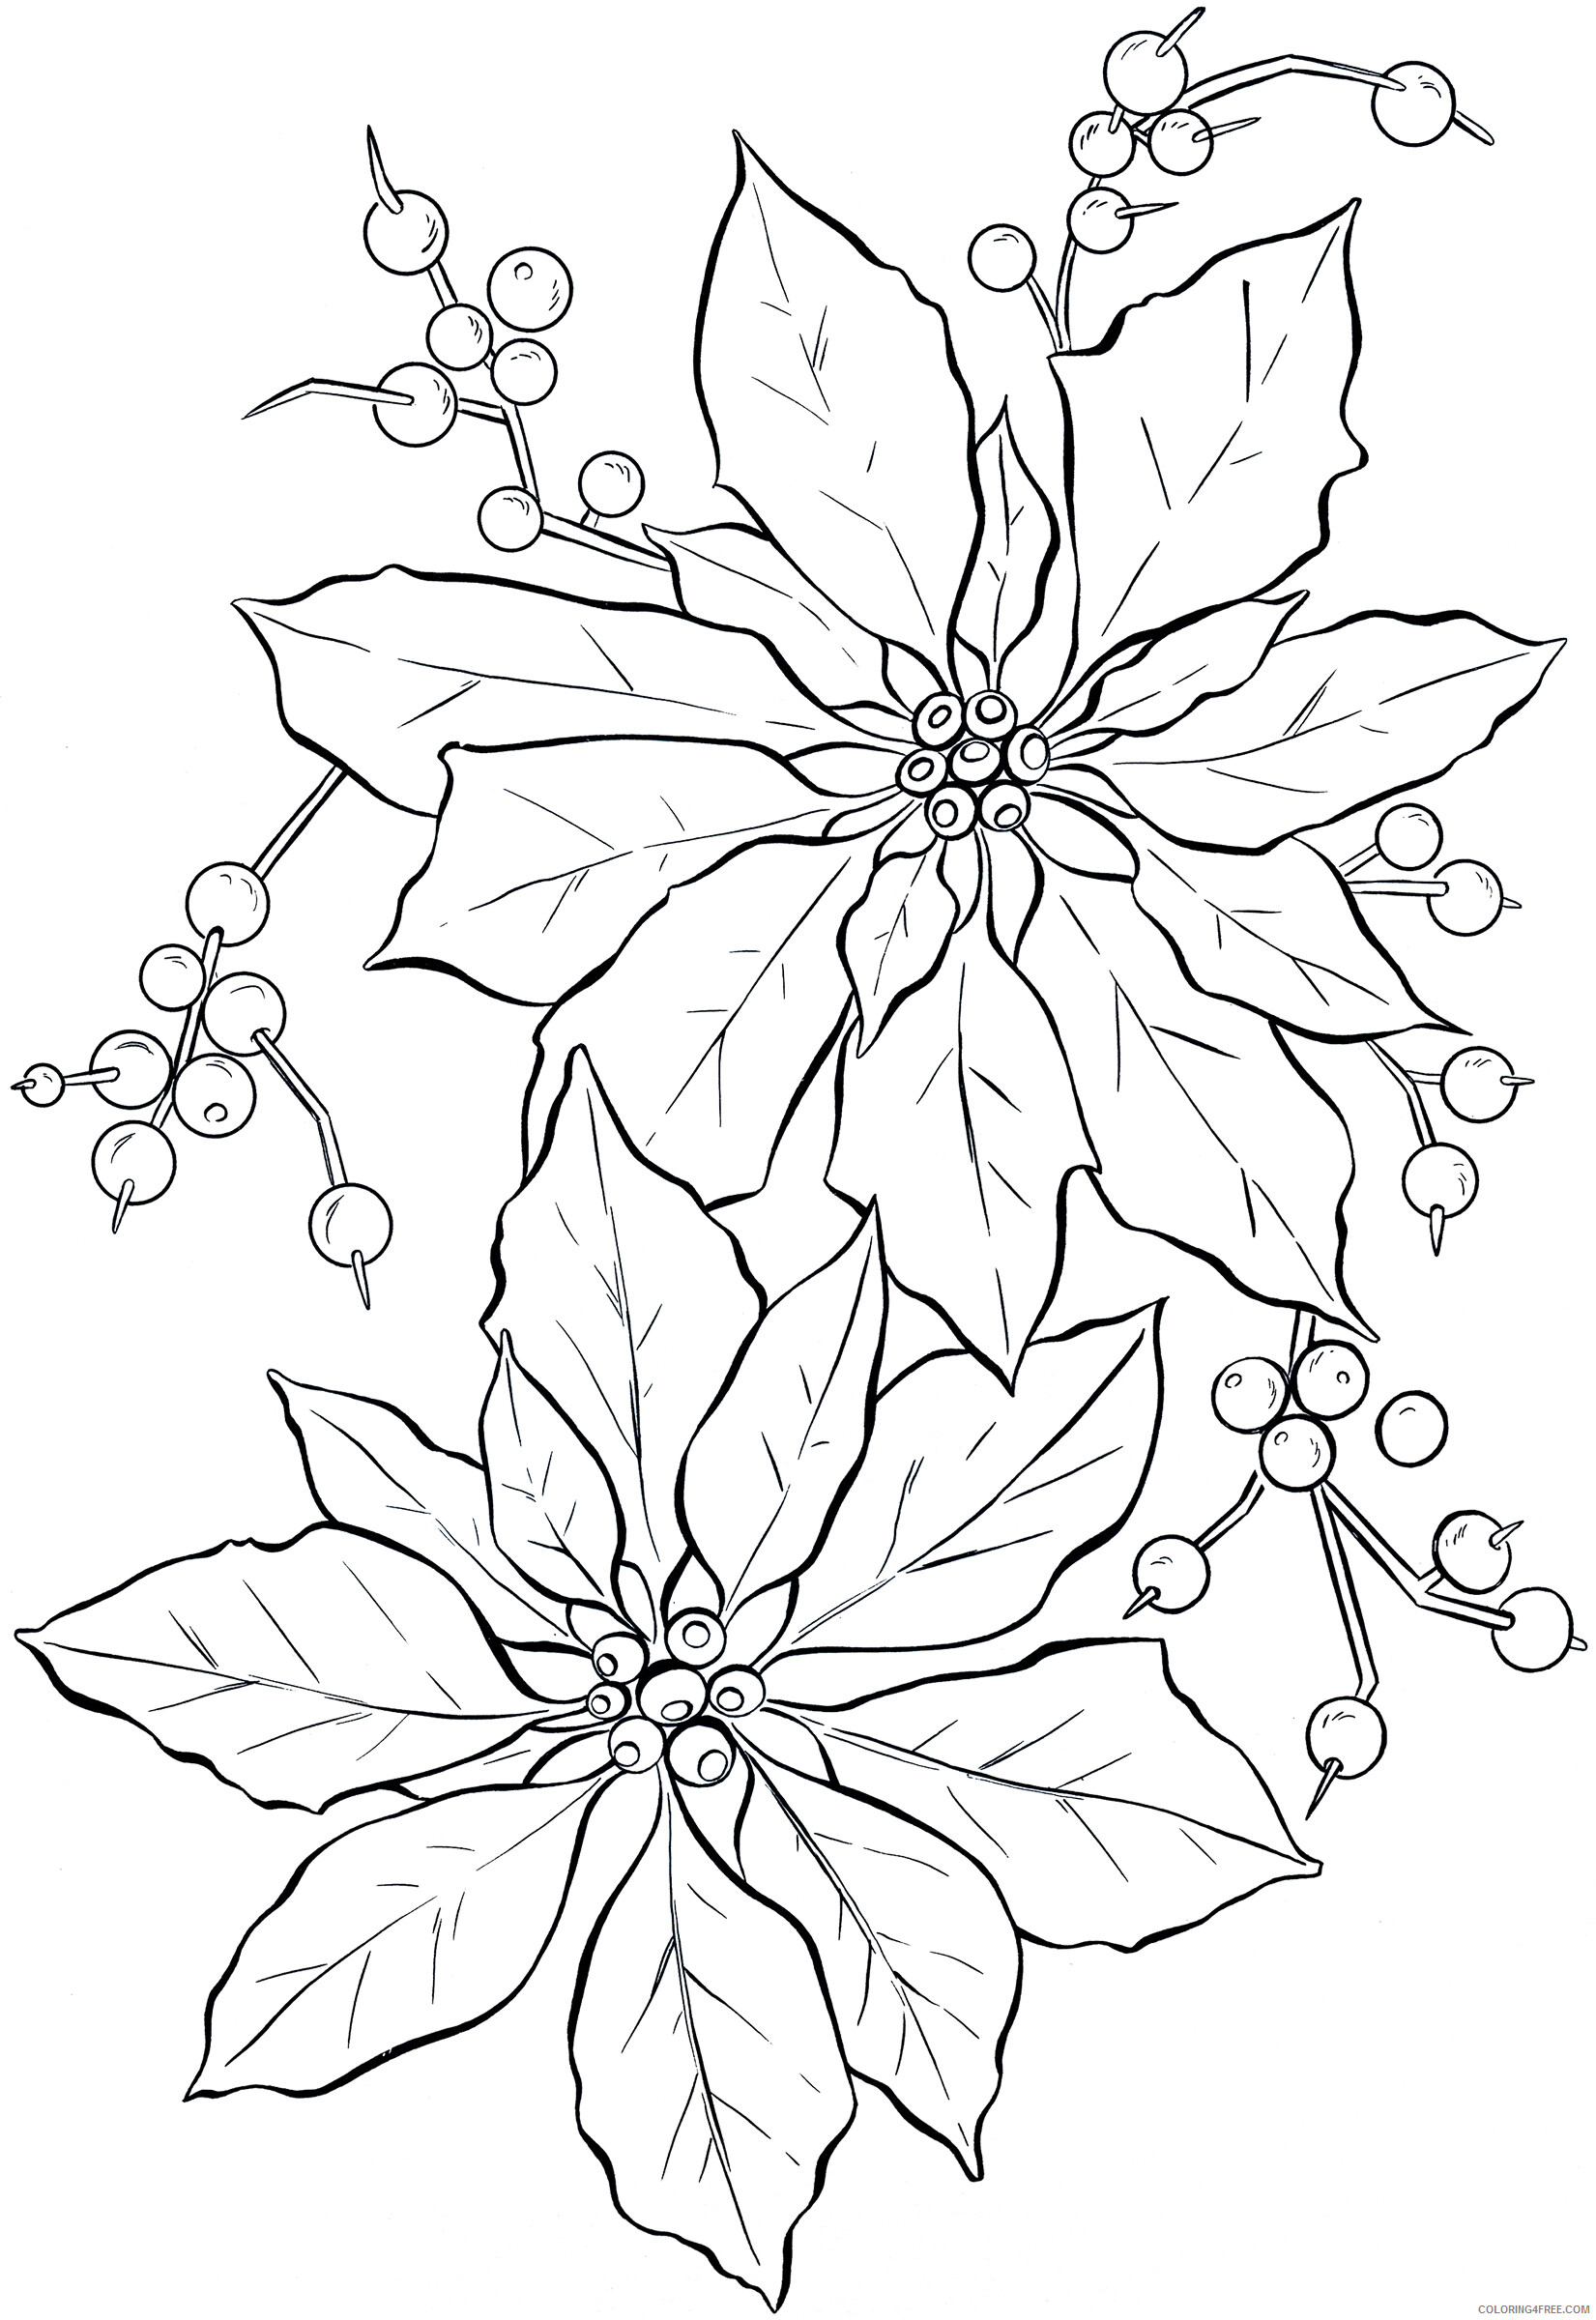 Poinsettia Coloring Pages Flowers Nature of Poinsettia Printable 2021 300 Coloring4free